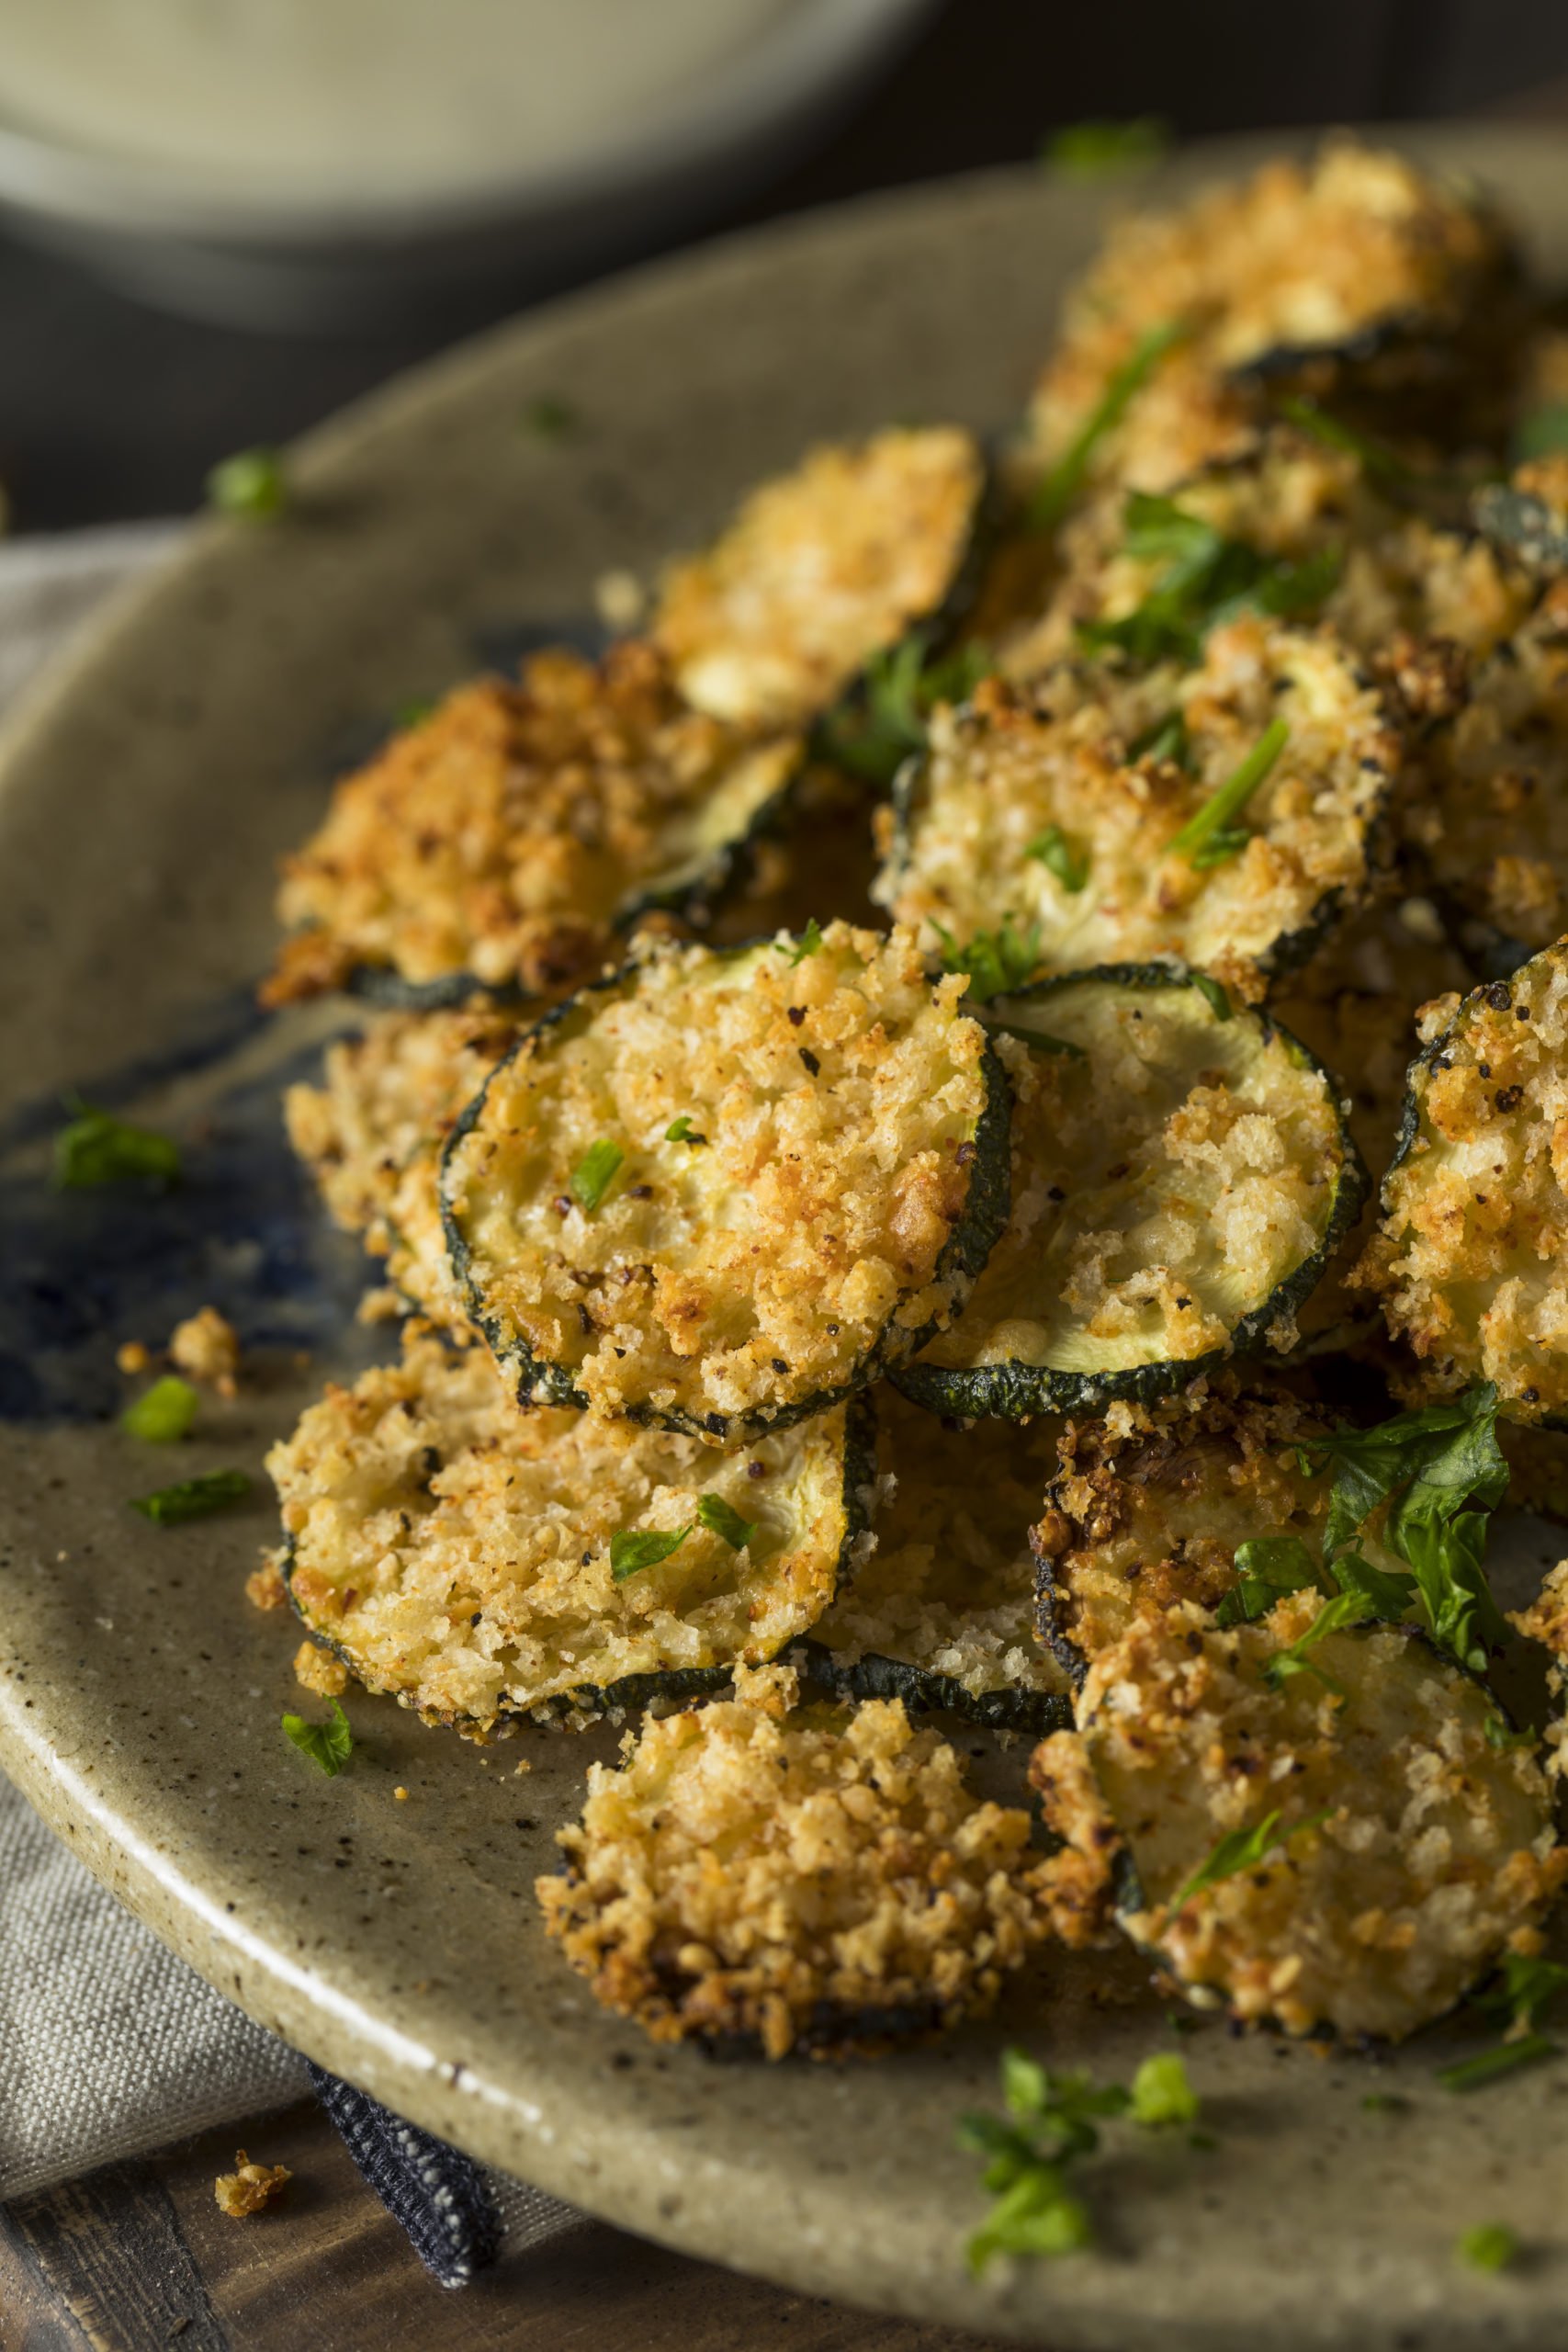 Healthy Air Fryer Zucchini Chips With Garlic Aioli Dipping Sauce